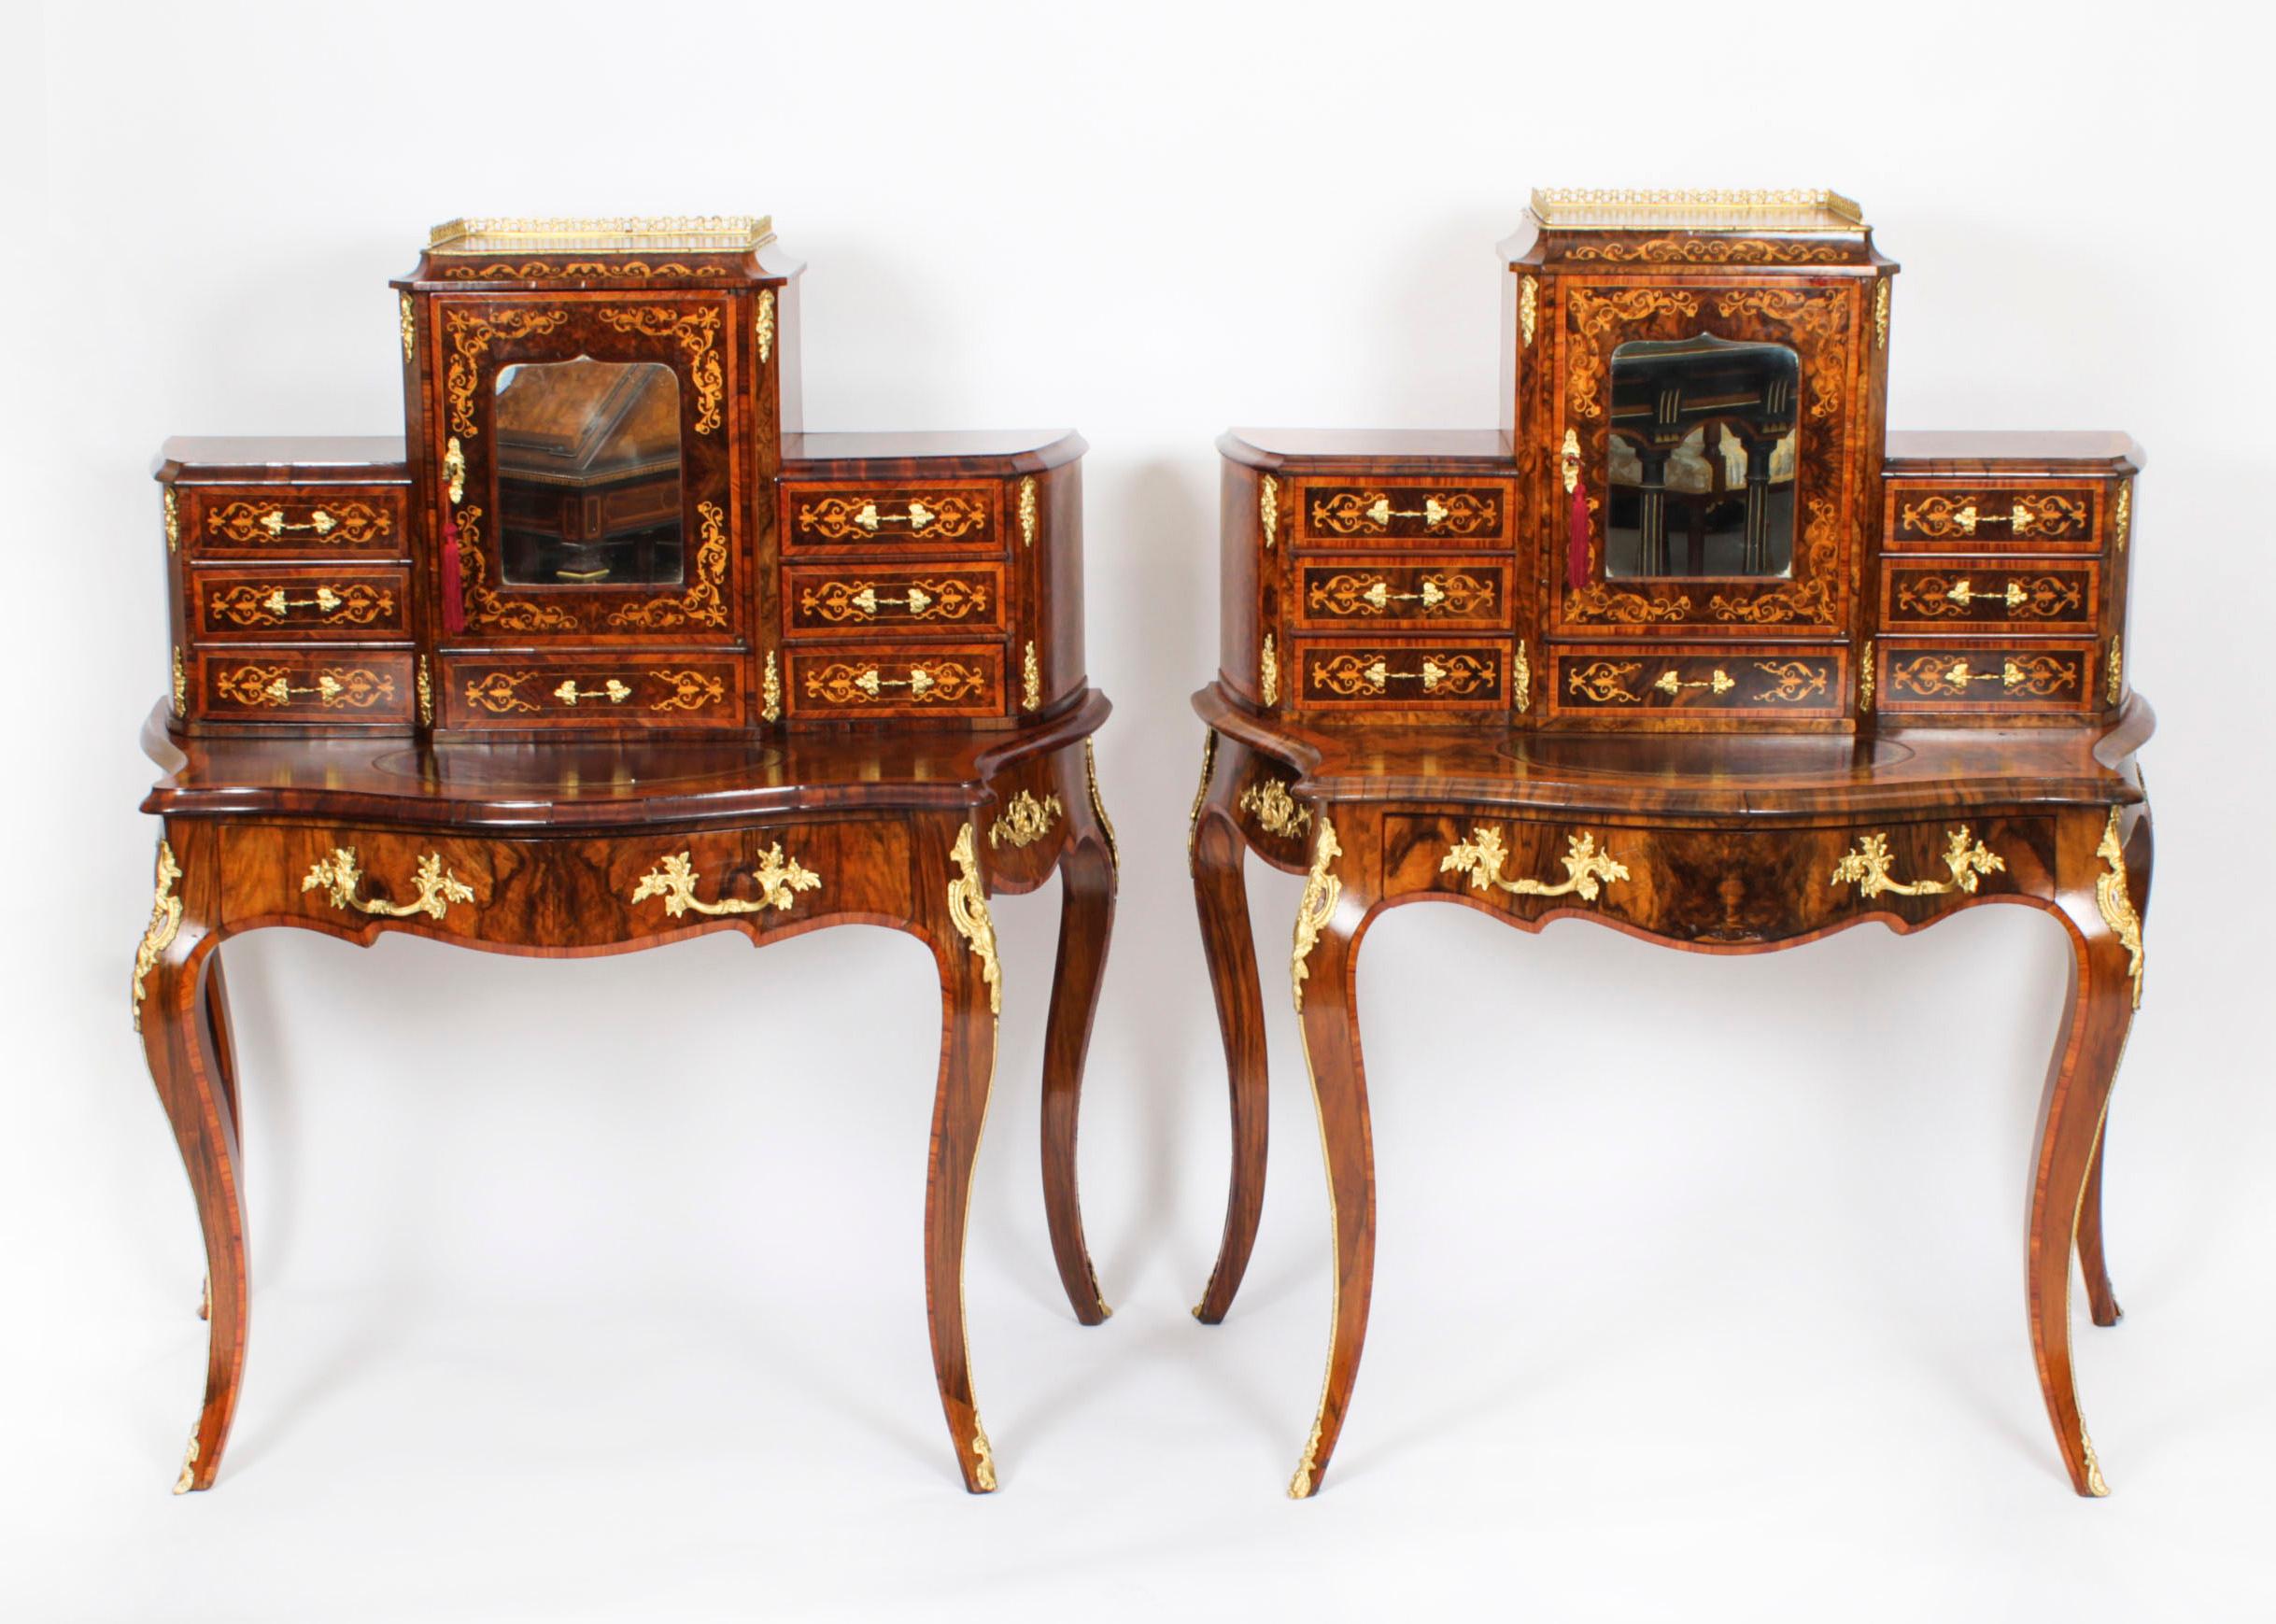 This is an elegant pair of Victorian burr walnut and marquetry Bonheur Du Jour's, or Ladies writing desks, circa 1860 in date. 
 
They feature superstructures that each comprises a large central bay with a mirror inset door and a three quarter